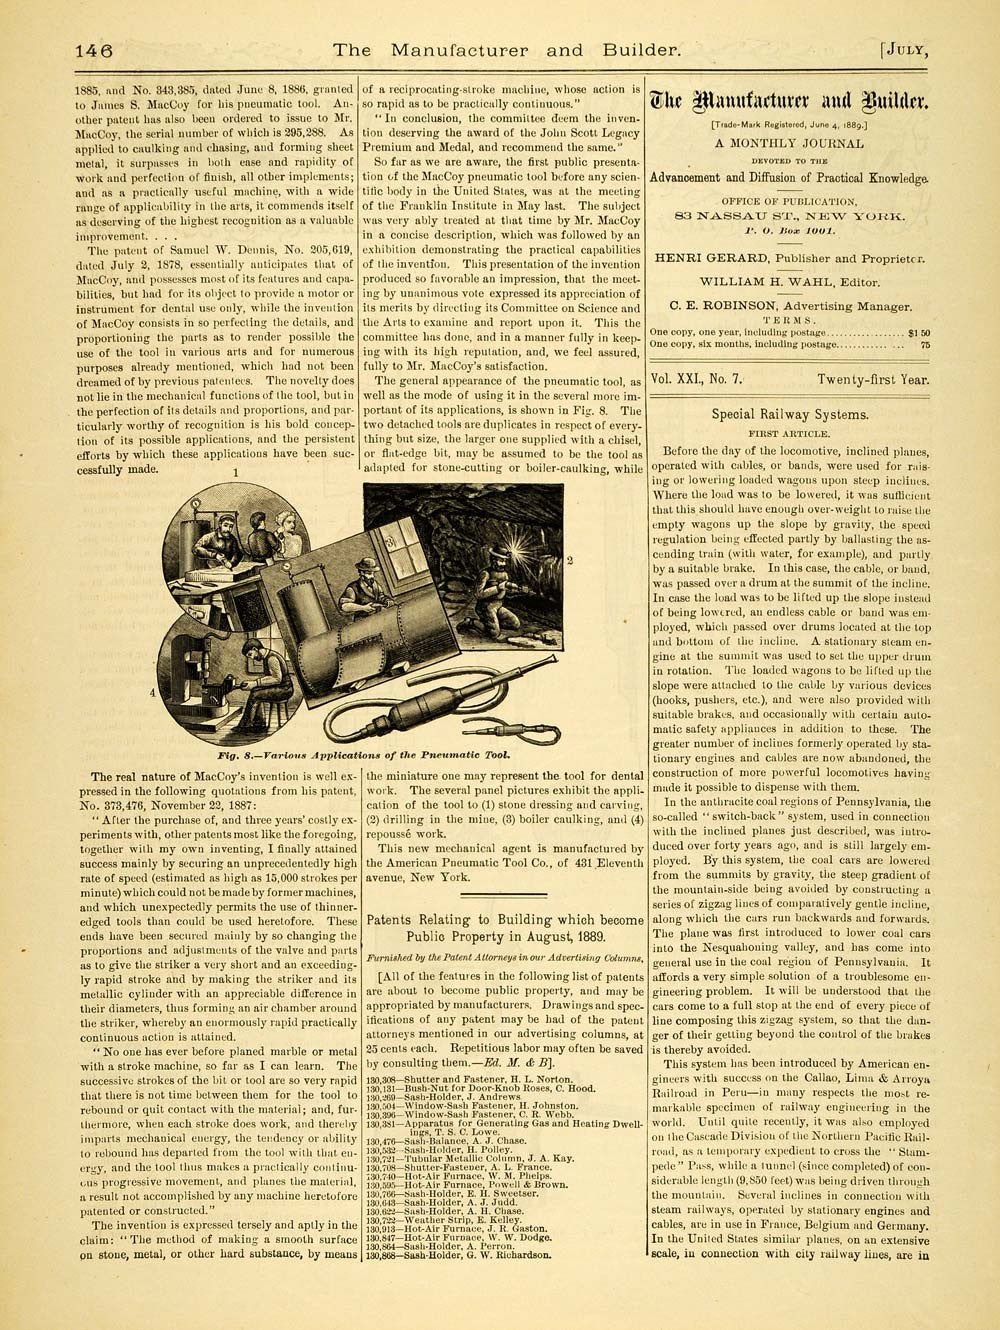 1889 Article American Pneumatic Tool Company NY James MacCoy Vintage Device MAB1 - Period Paper
 - 2